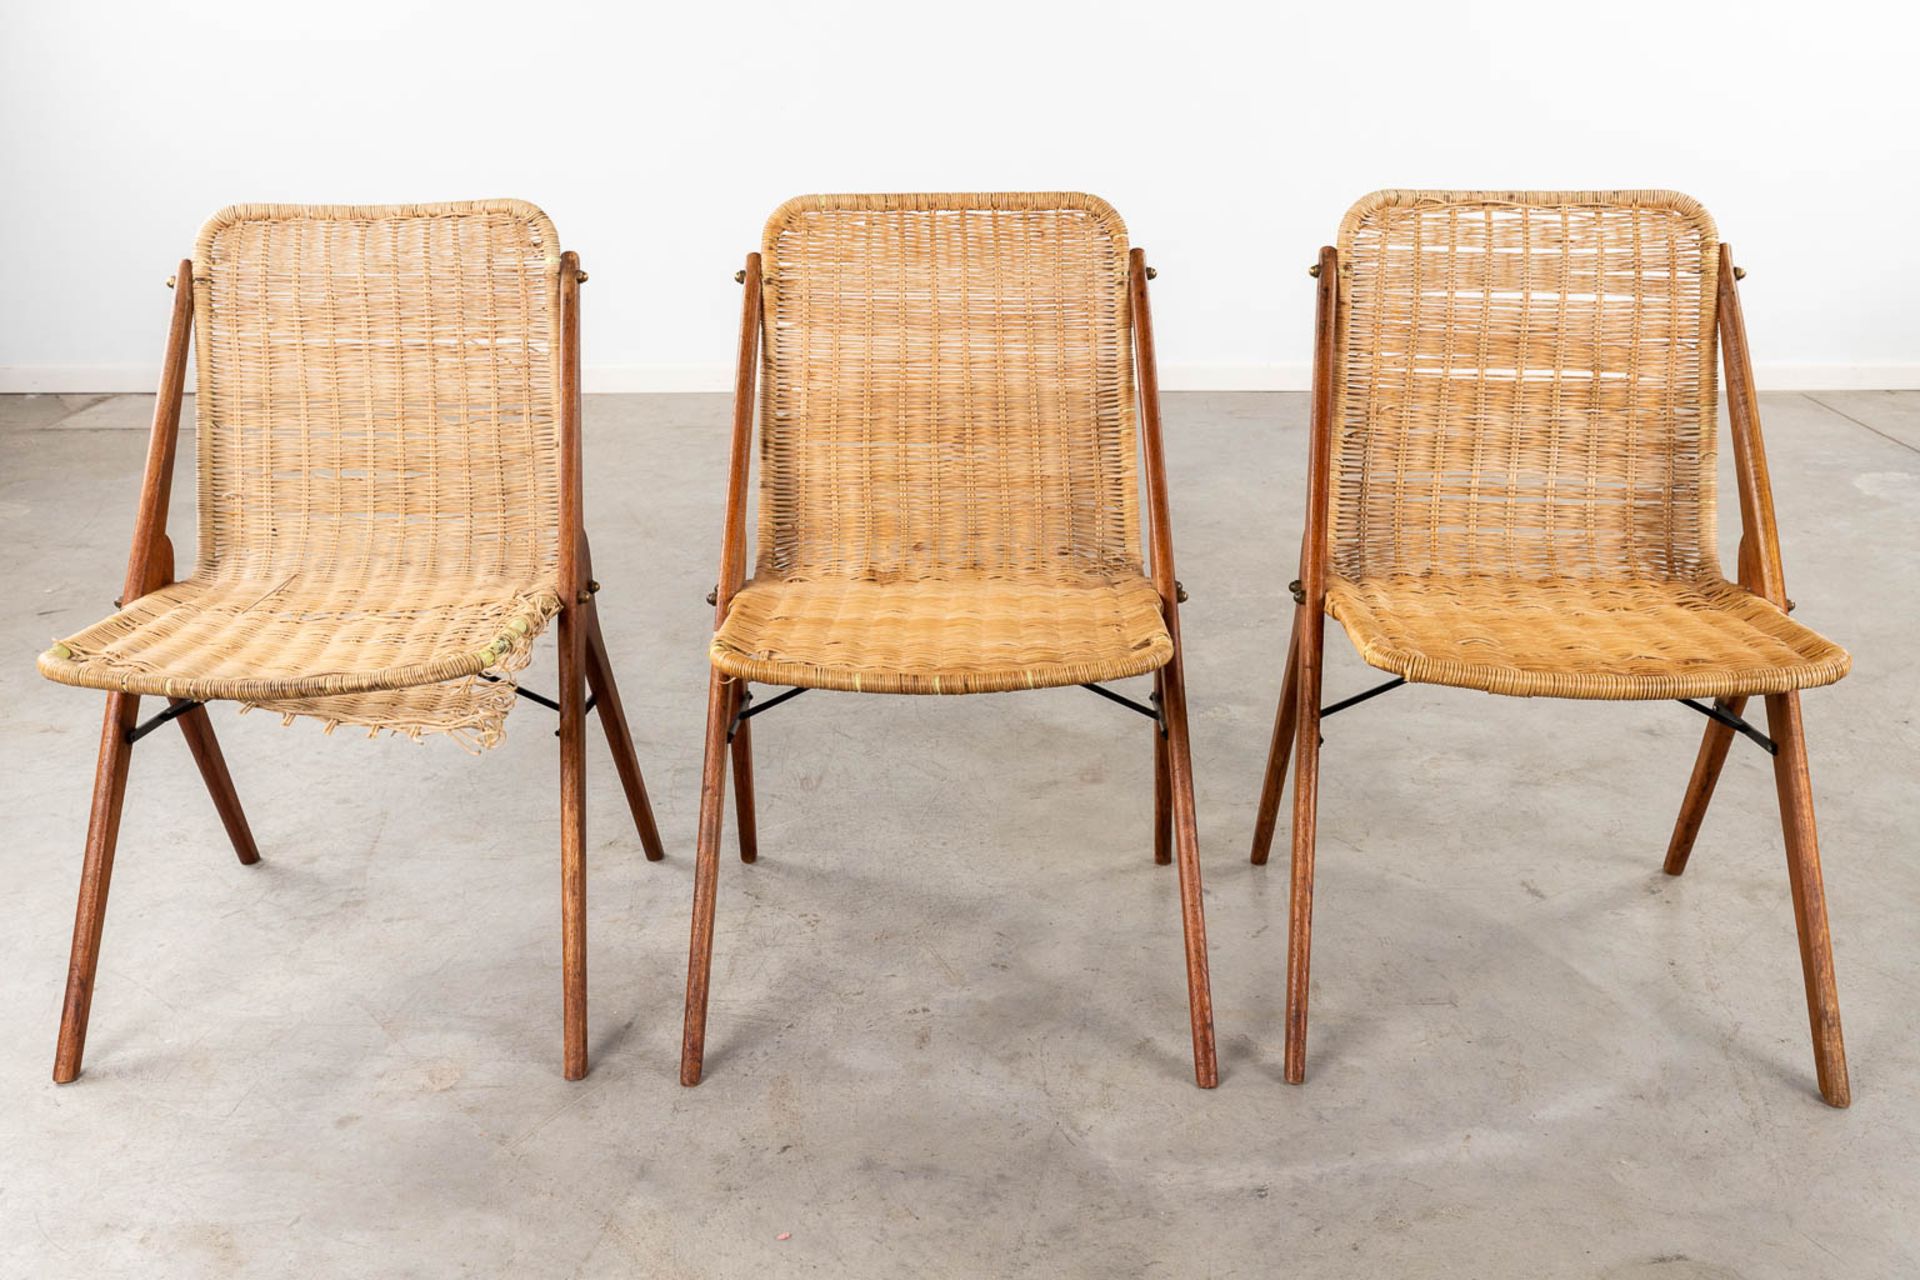 A mid-century table and 6 chairs, rotan and metal, teak wood. Circa 1960. (D:86 x W:160 x H:76 cm) - Image 19 of 31